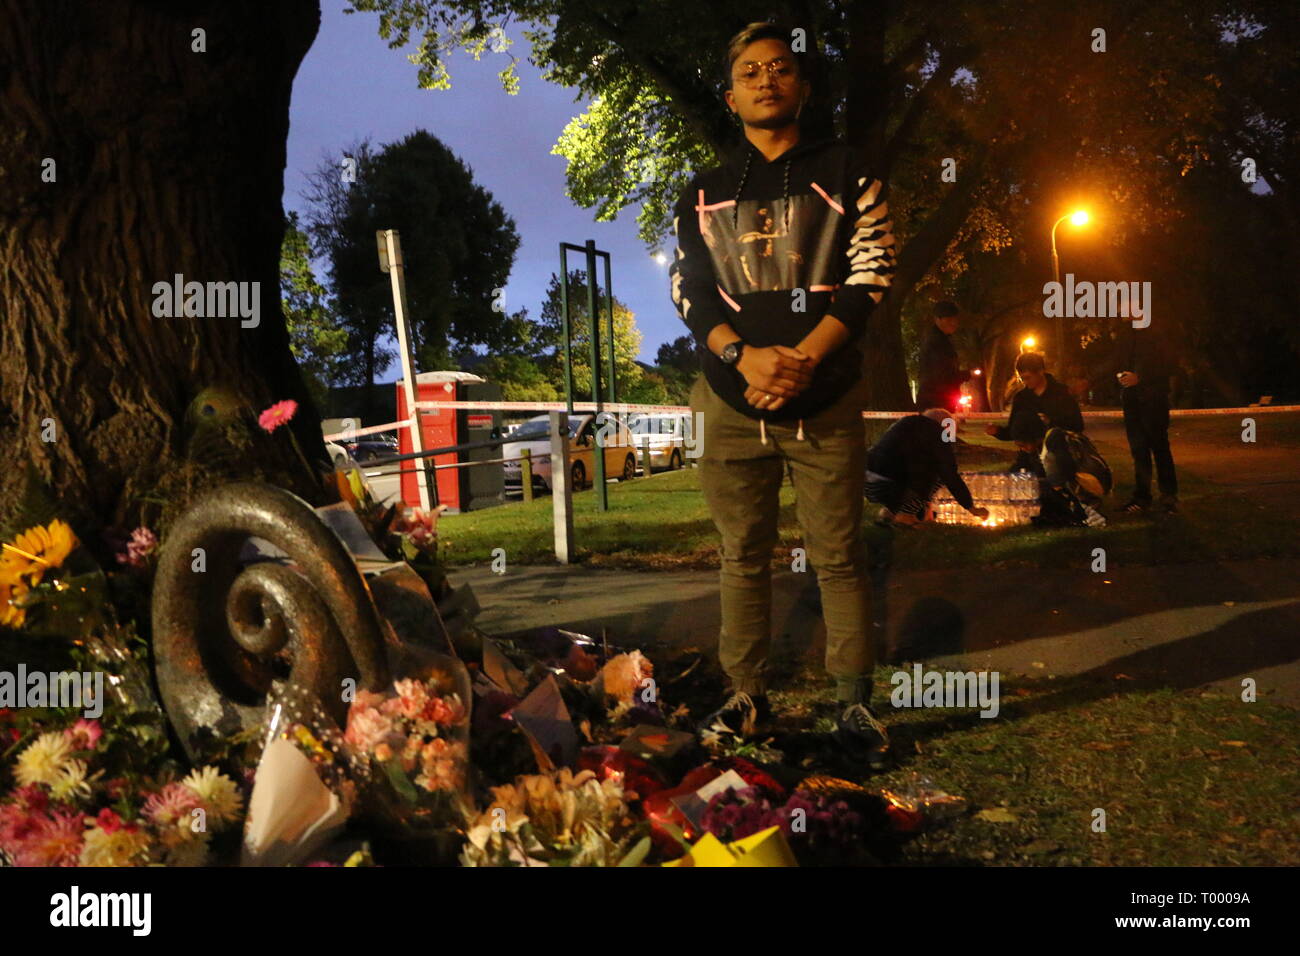 Christchurch, New Zealand. 16th Mar, 2019. The very brave Kevin Huisena, who had returned for the candlelight vigil, only after fleeing the Deans Rd mosque when the shooting began. One of his friends who he attended the mosque with is still missing and presumed to be still in the mosque deceased.Around 49 people has been reportedly killed in the Christchurch mosques terrorist attack shooting targeting the Masjid Al Noor Mosque and the Linwood Mosque. Credit: Adam Bradley/SOPA Images/ZUMA Wire/Alamy Live News Stock Photo